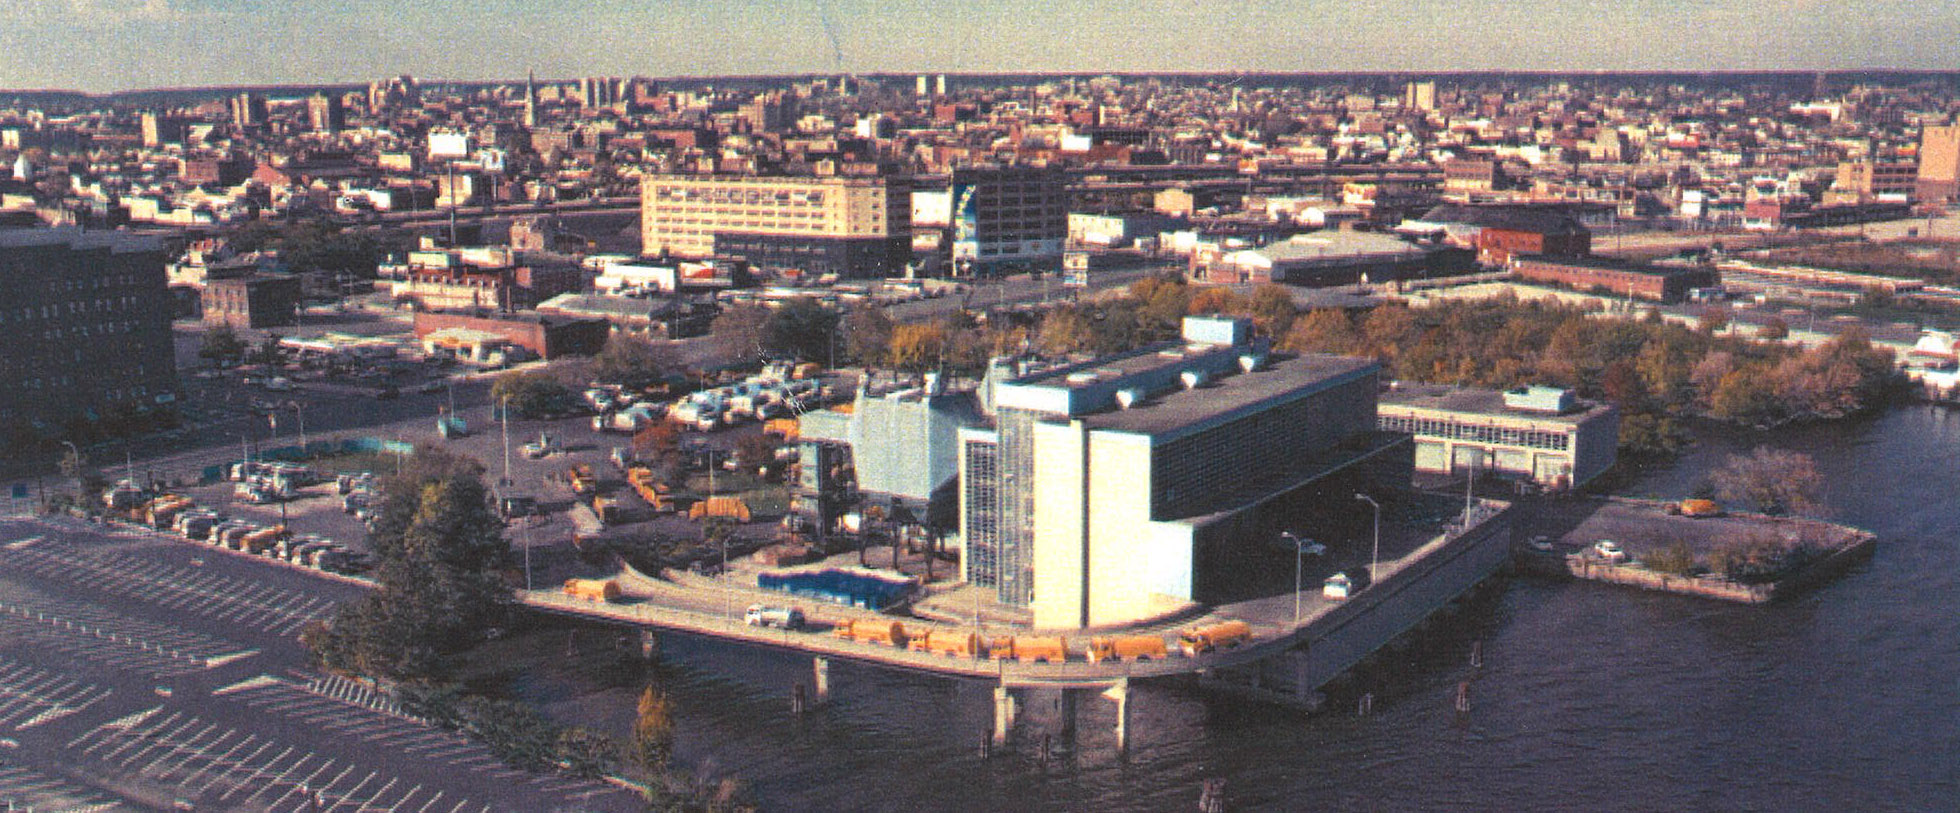 Former city incinerator on Festival Pier site, courtesy of DRWC